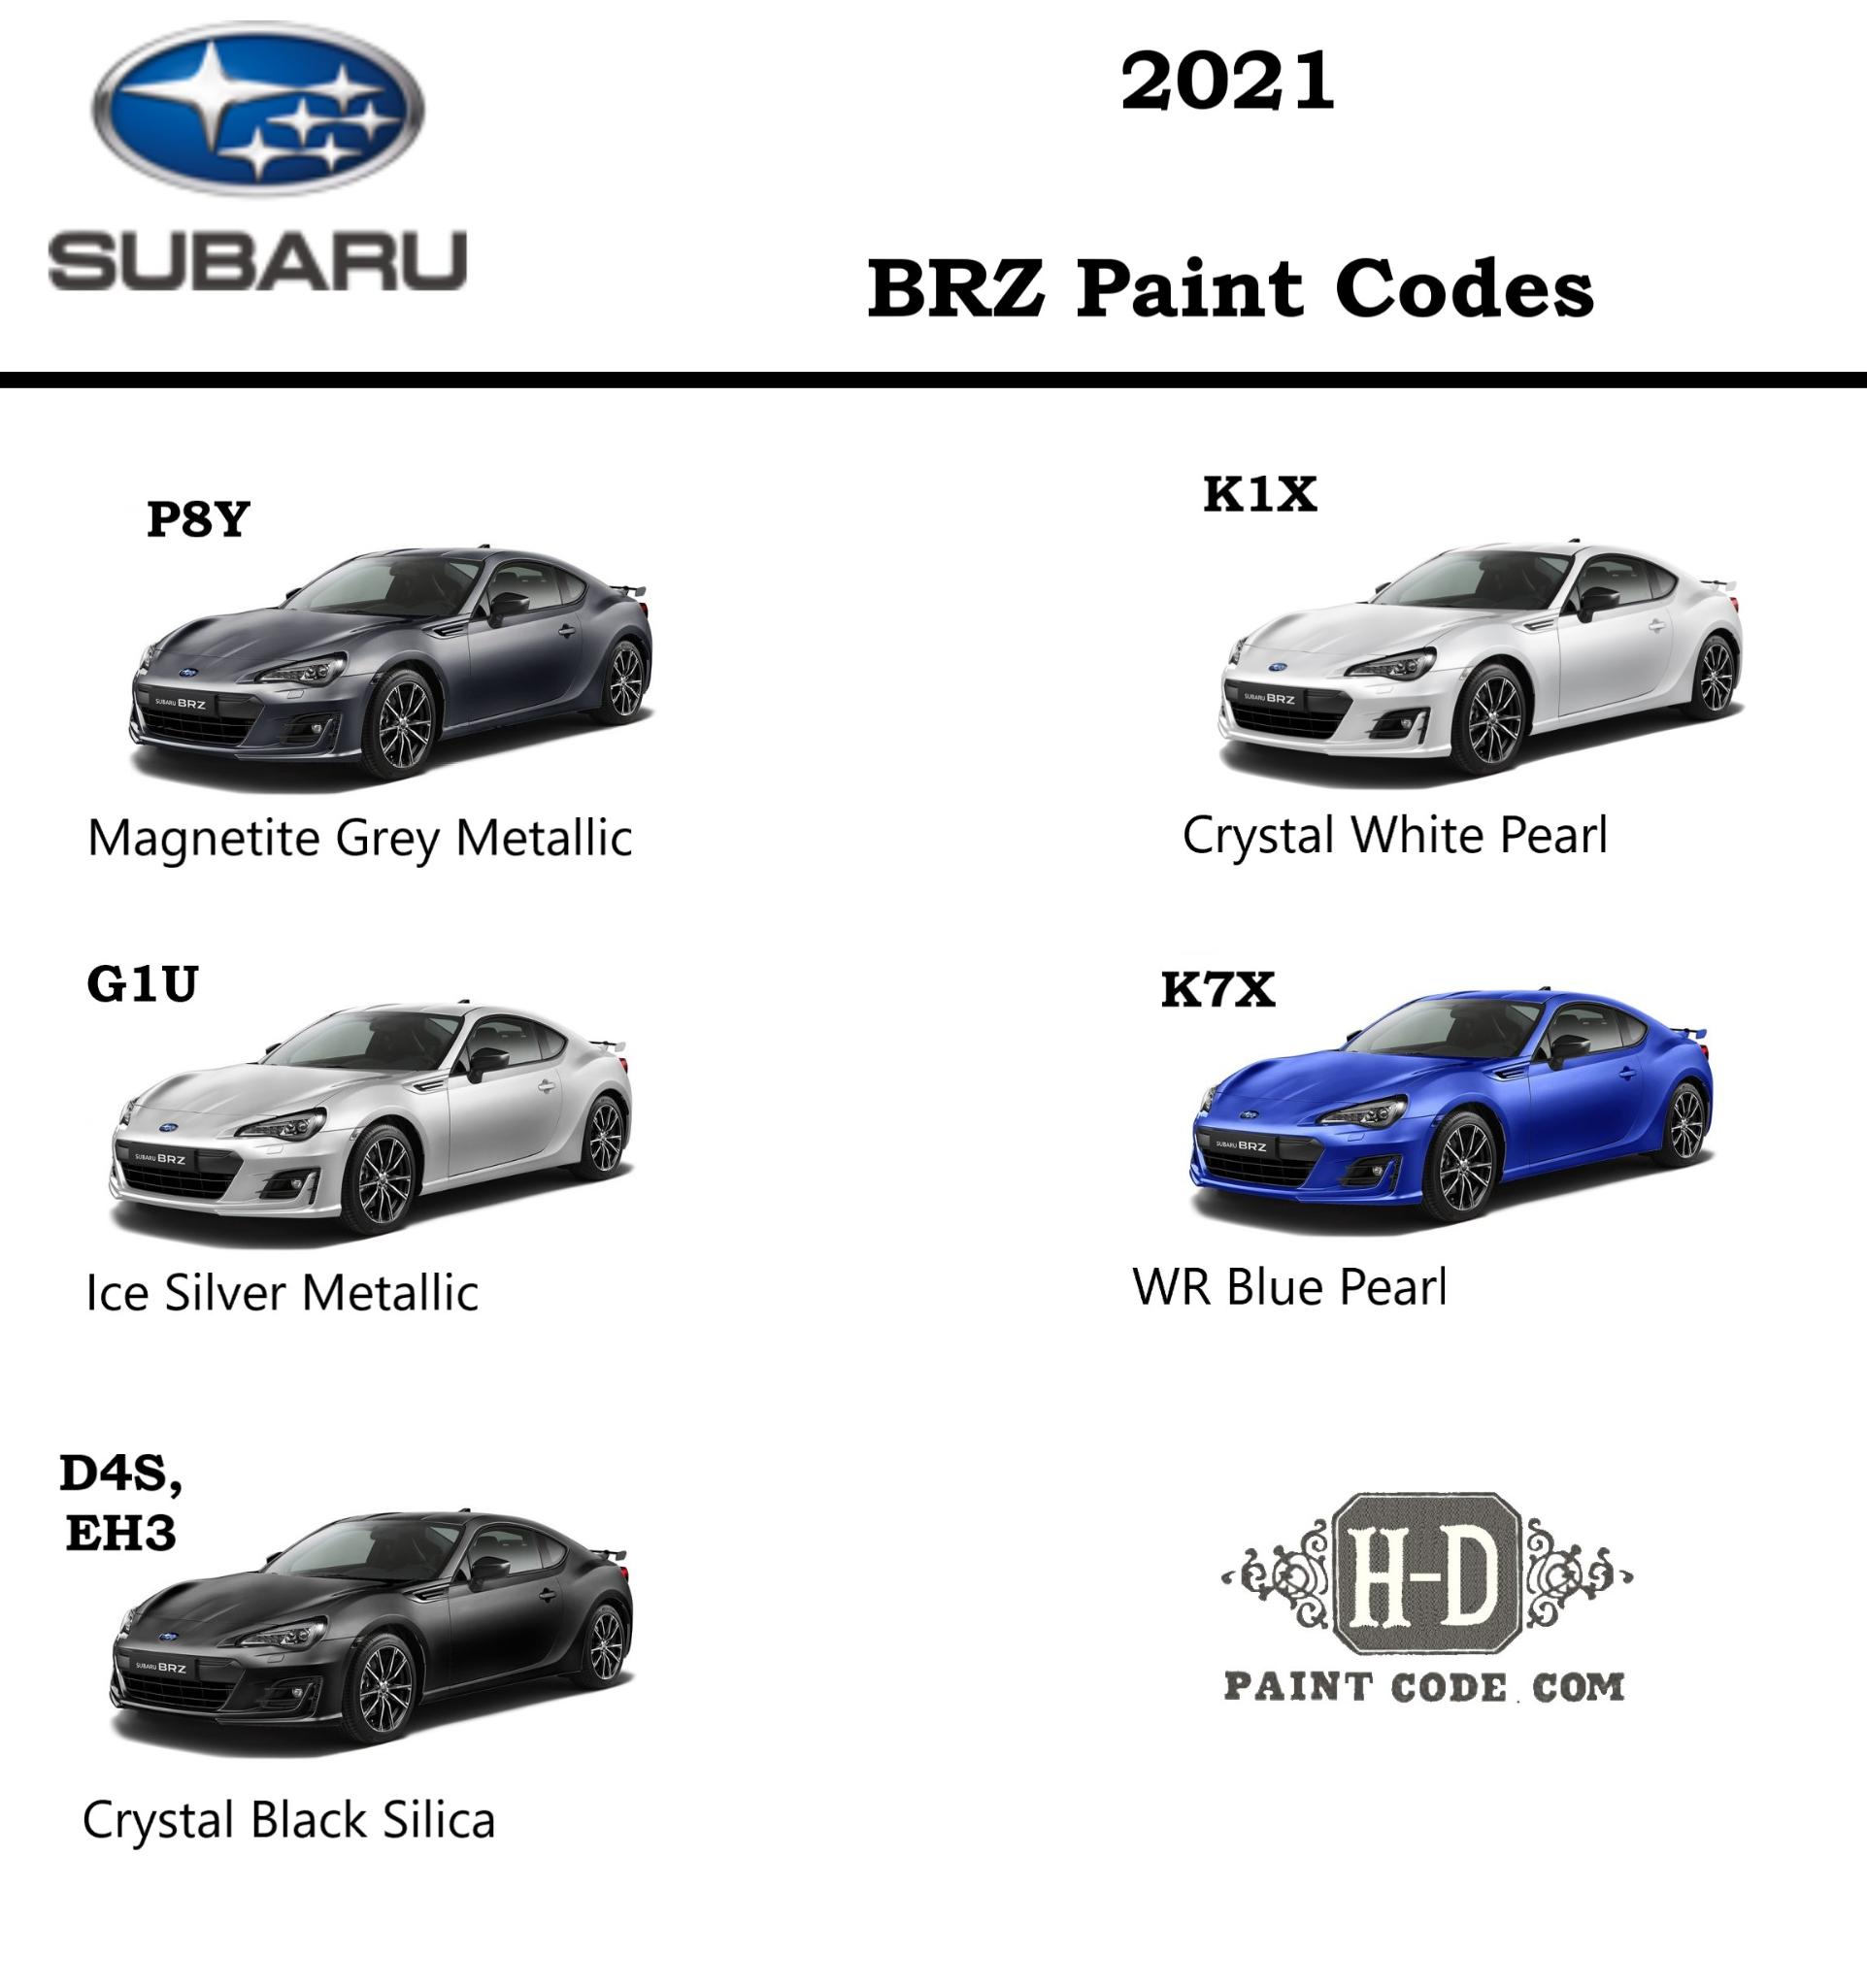 Paint colors and codes for 2021 Subaru BRZ vehicles